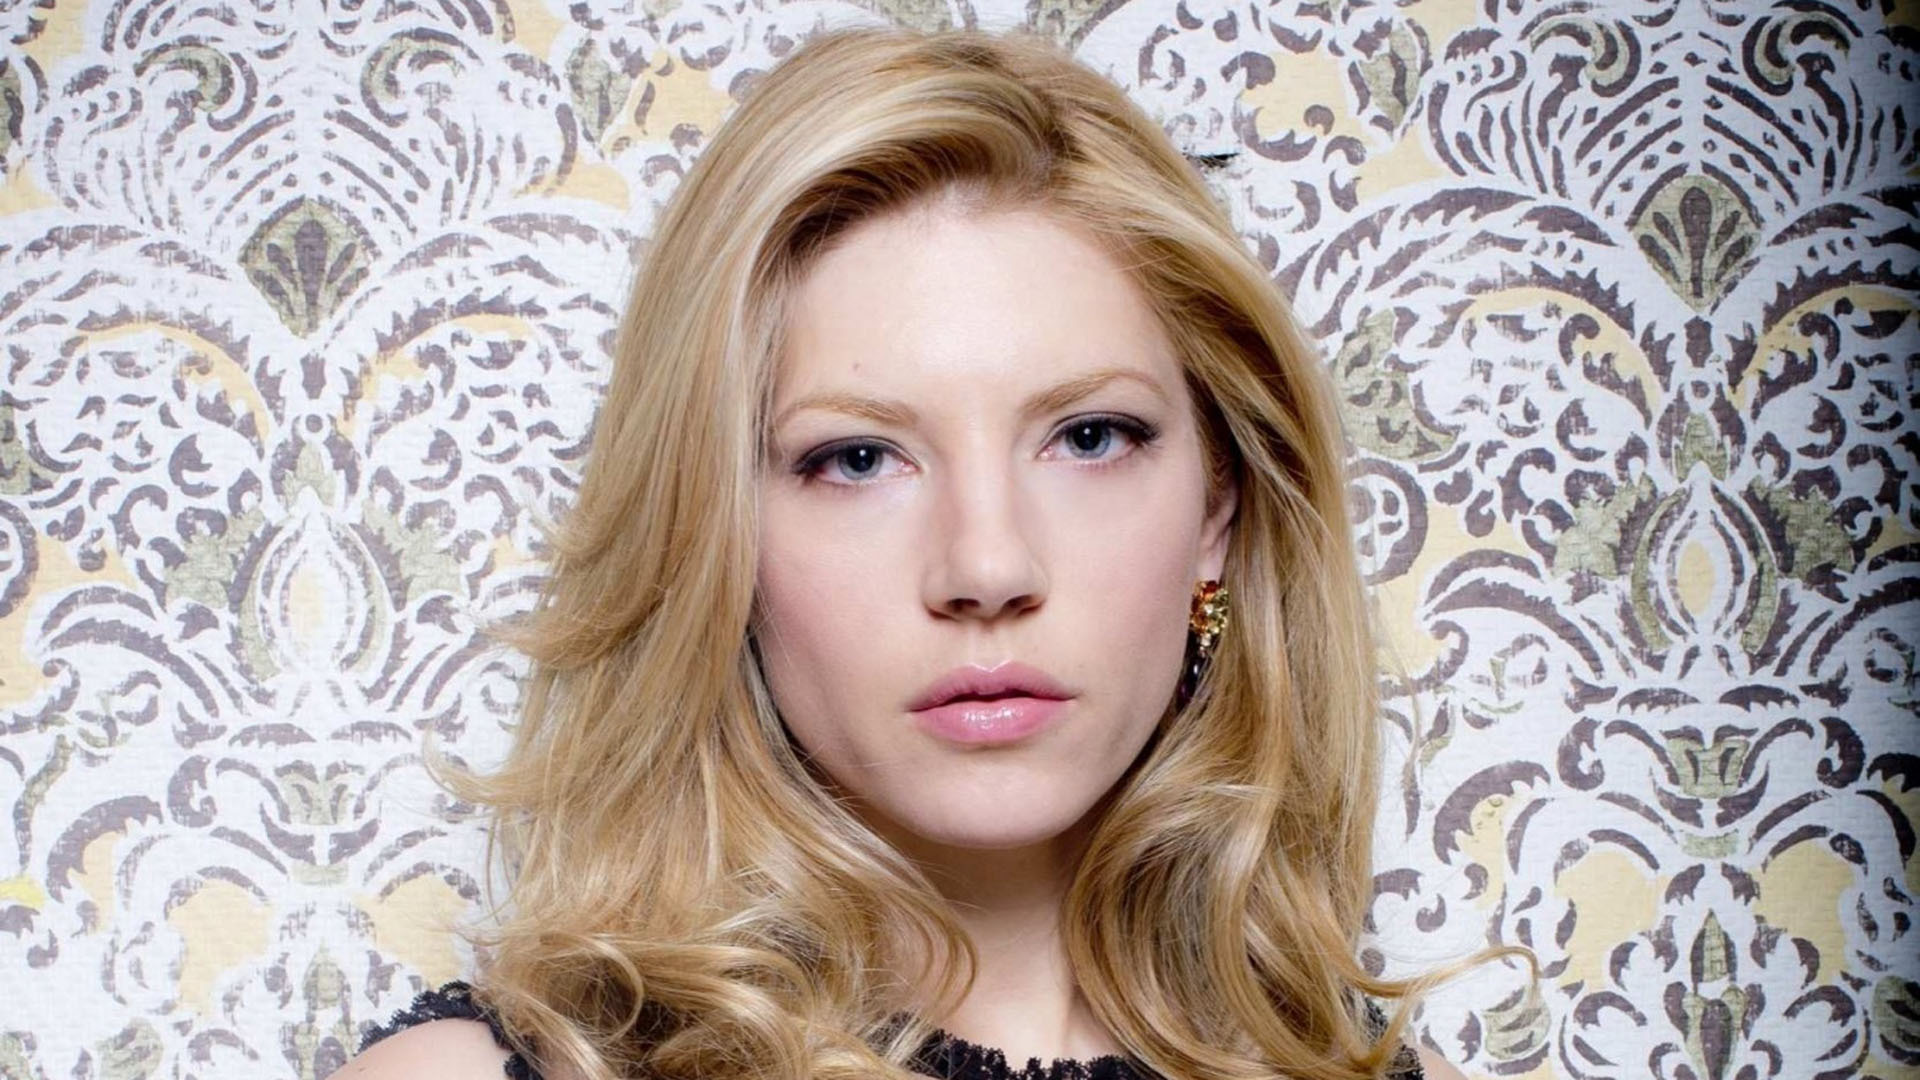 Katheryn Winnick Wallpaper Image Photos Pictures Background